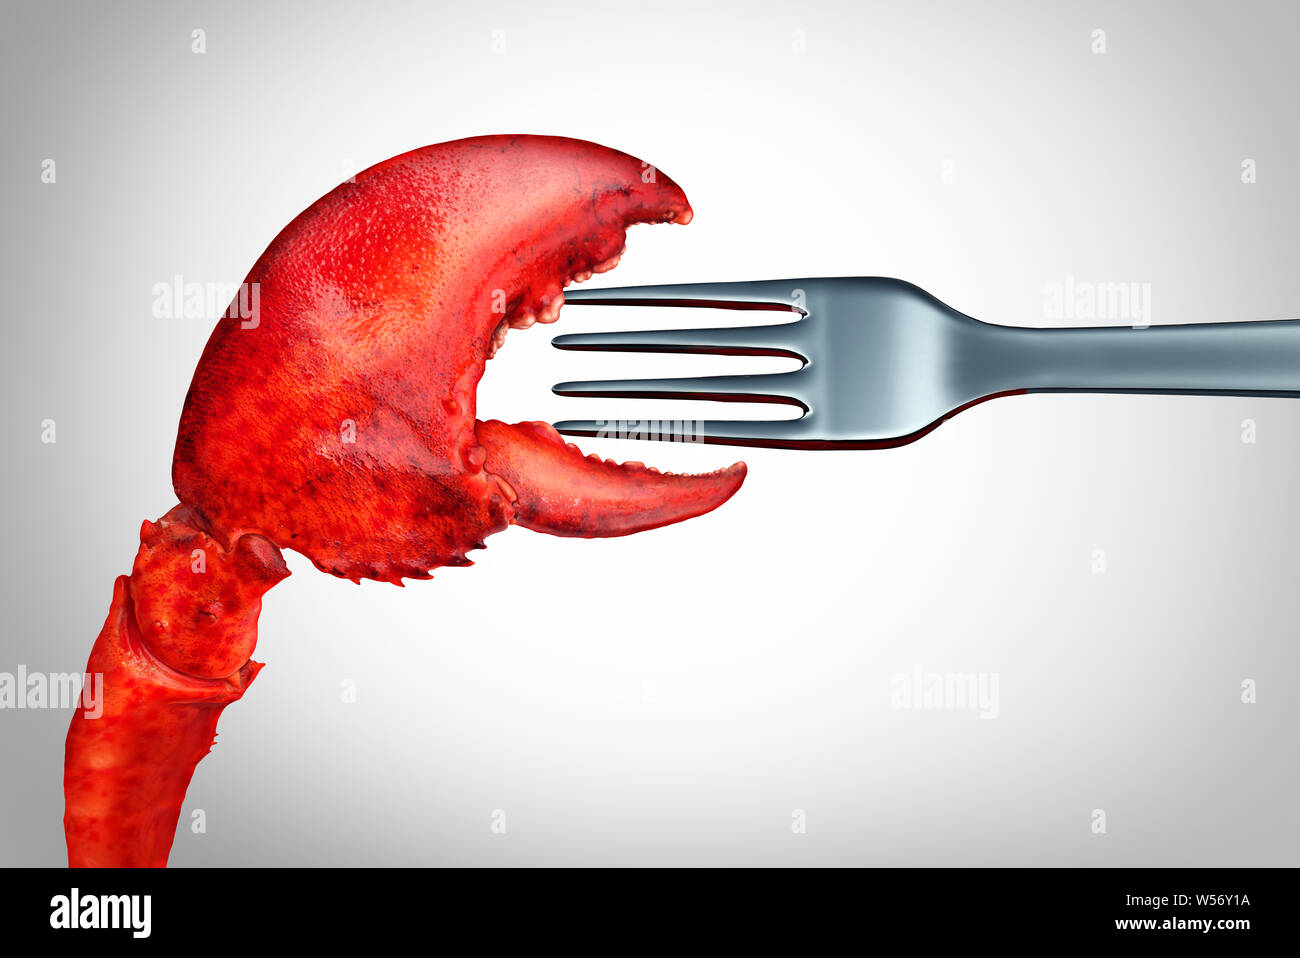 Eating lobster seafood dinner concept as fresh shellfish claw symbol and fork as a red shell crustacean representing expensive delicious cuisine with Stock Photo